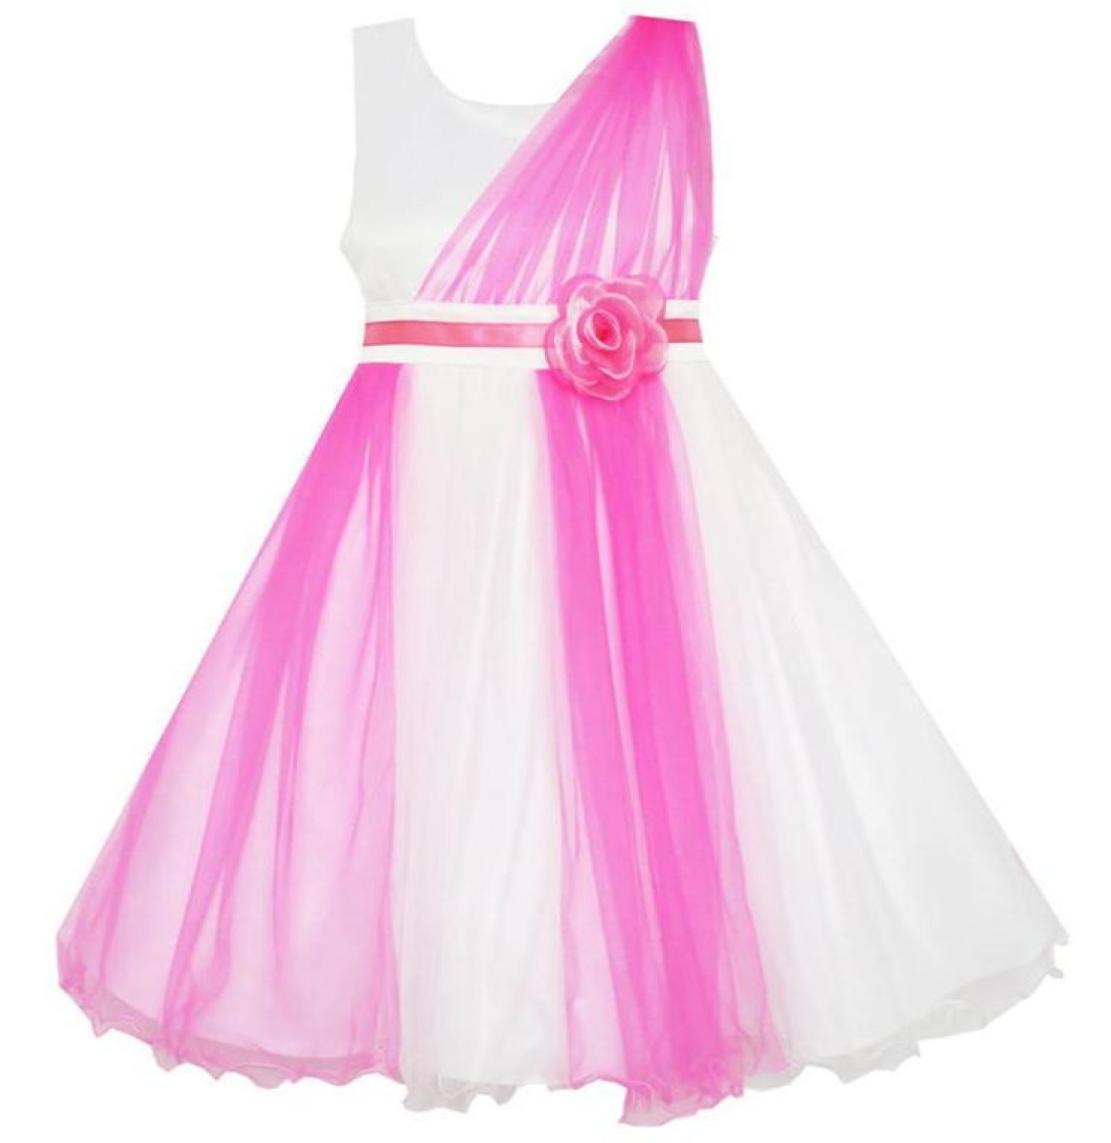 

Girl039s Dresses Girls Dress Elegant Wedding Gown Bridesmaid Tulle Flower 2021 Summer Princess Party Kids Clothes Size 410 Car8404436, Pink